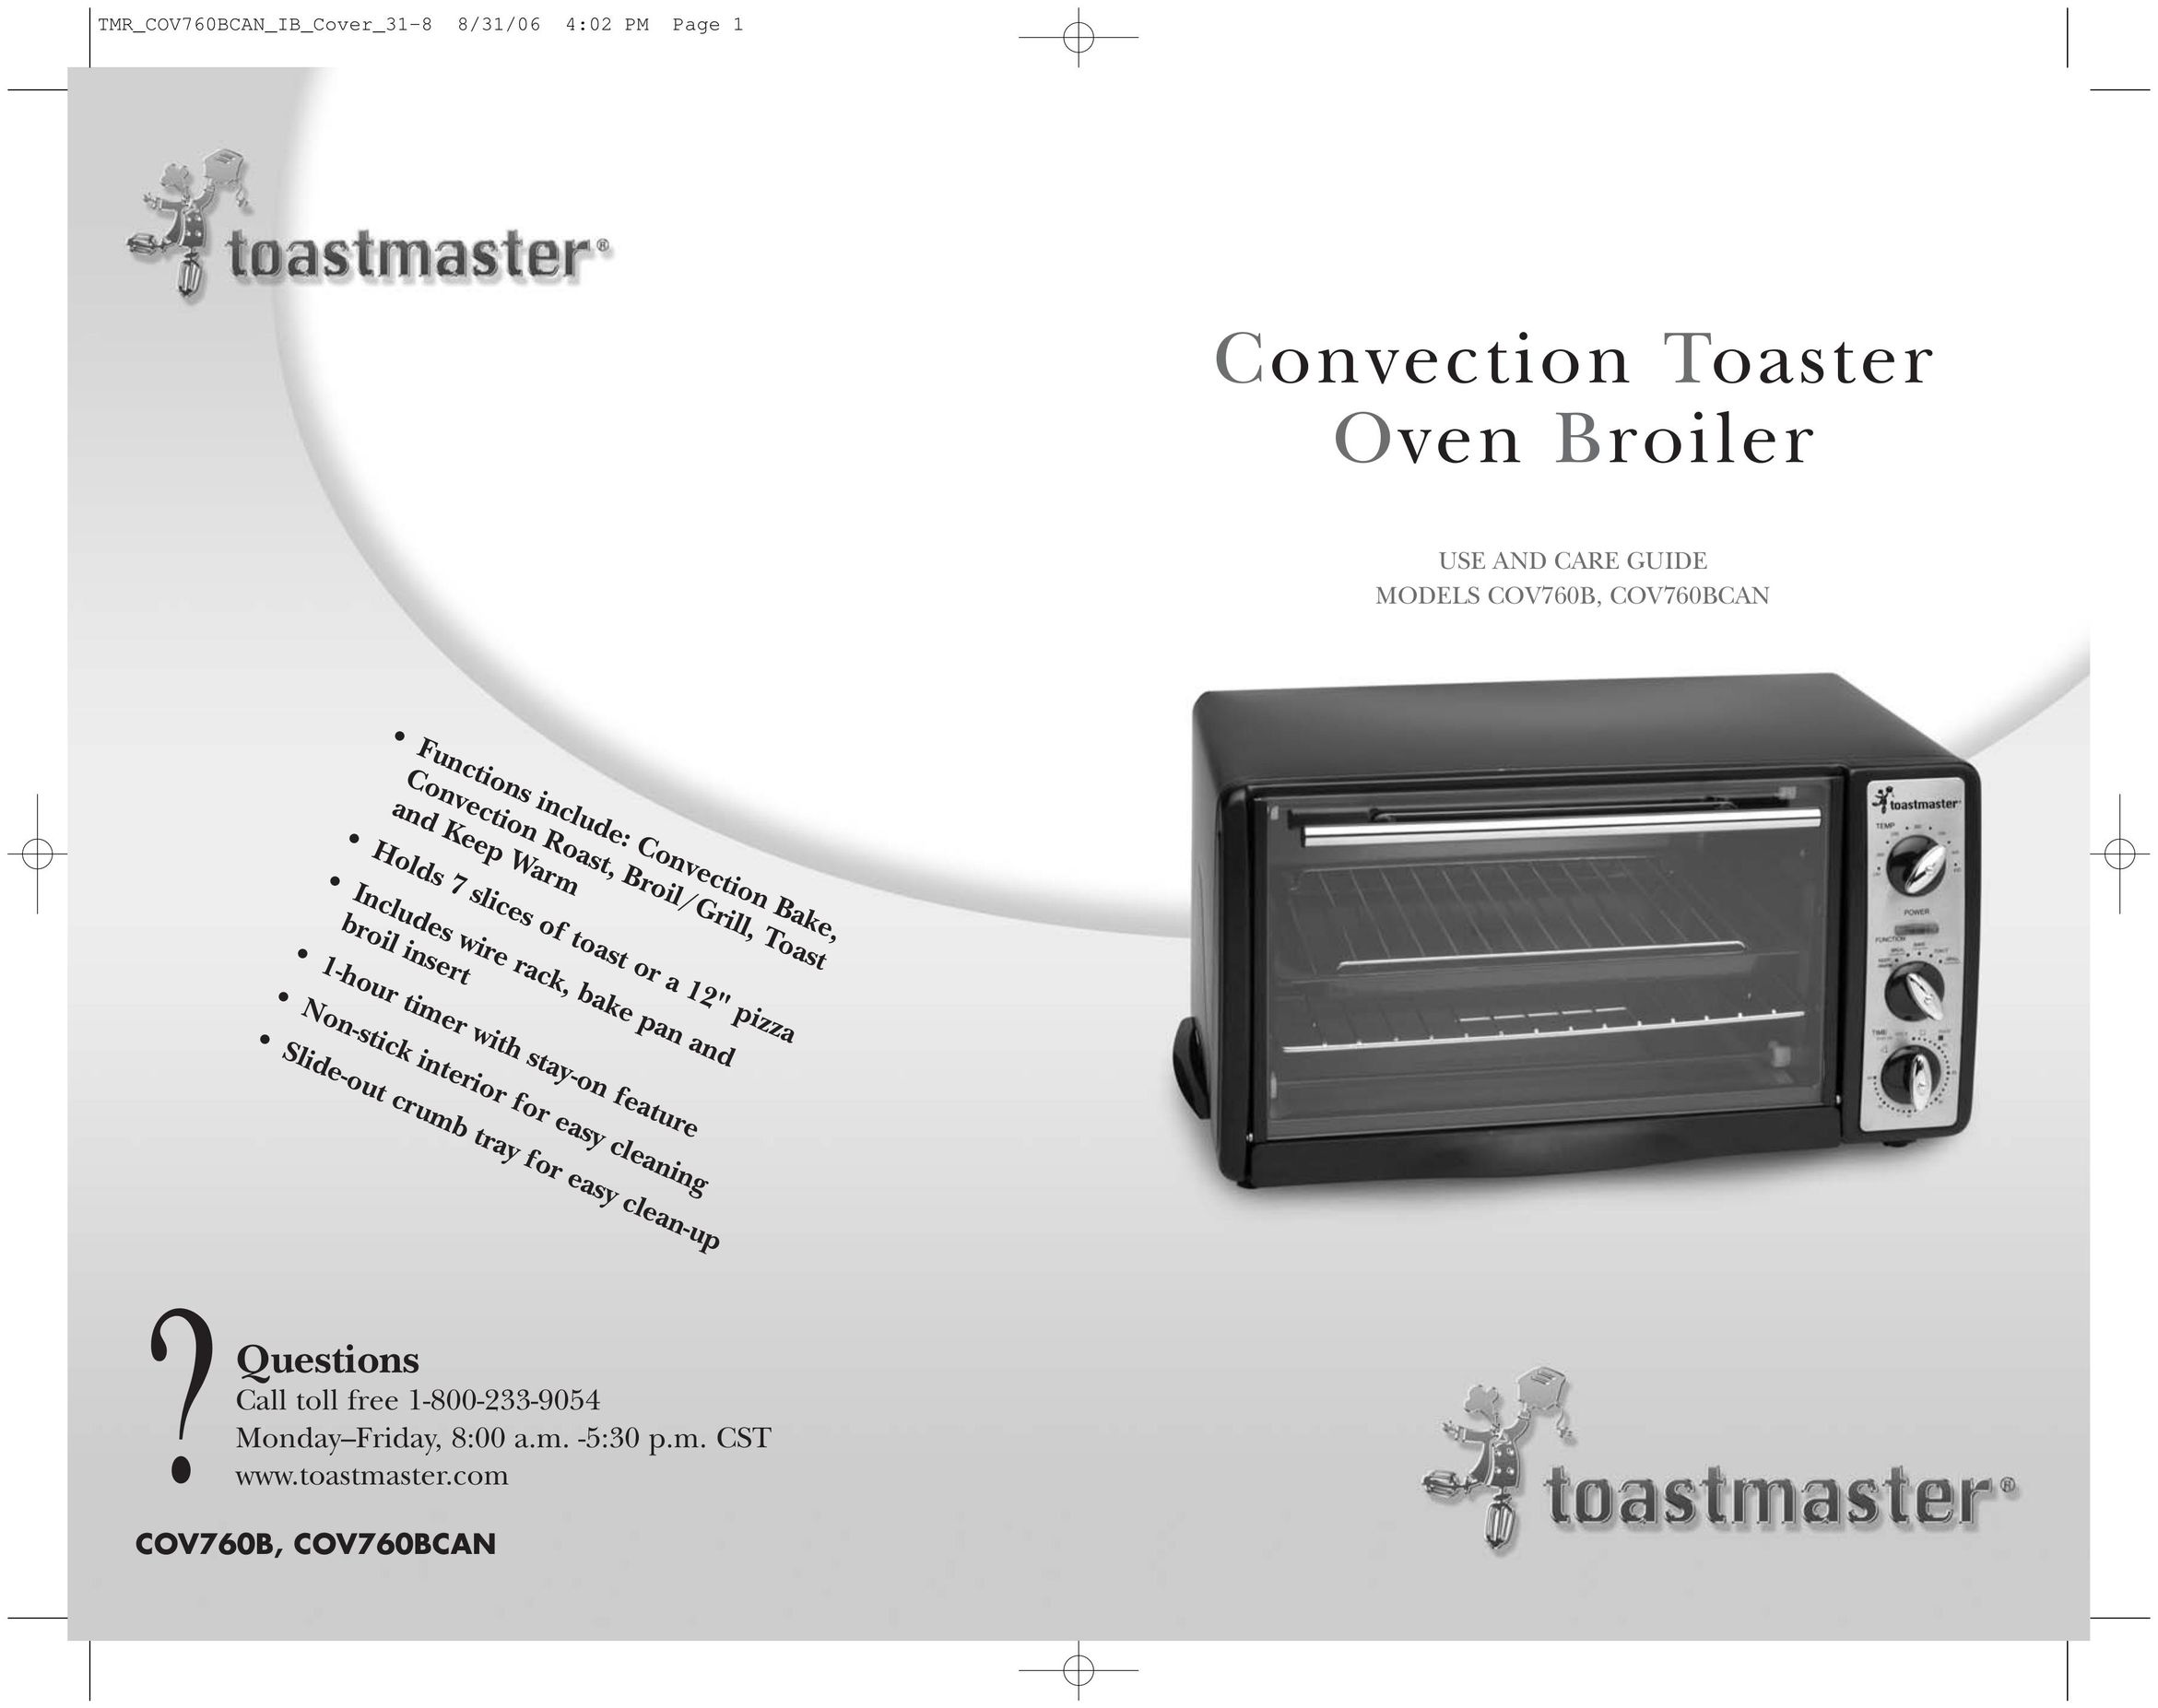 Toastmaster COV760BCAN Convection Oven User Manual